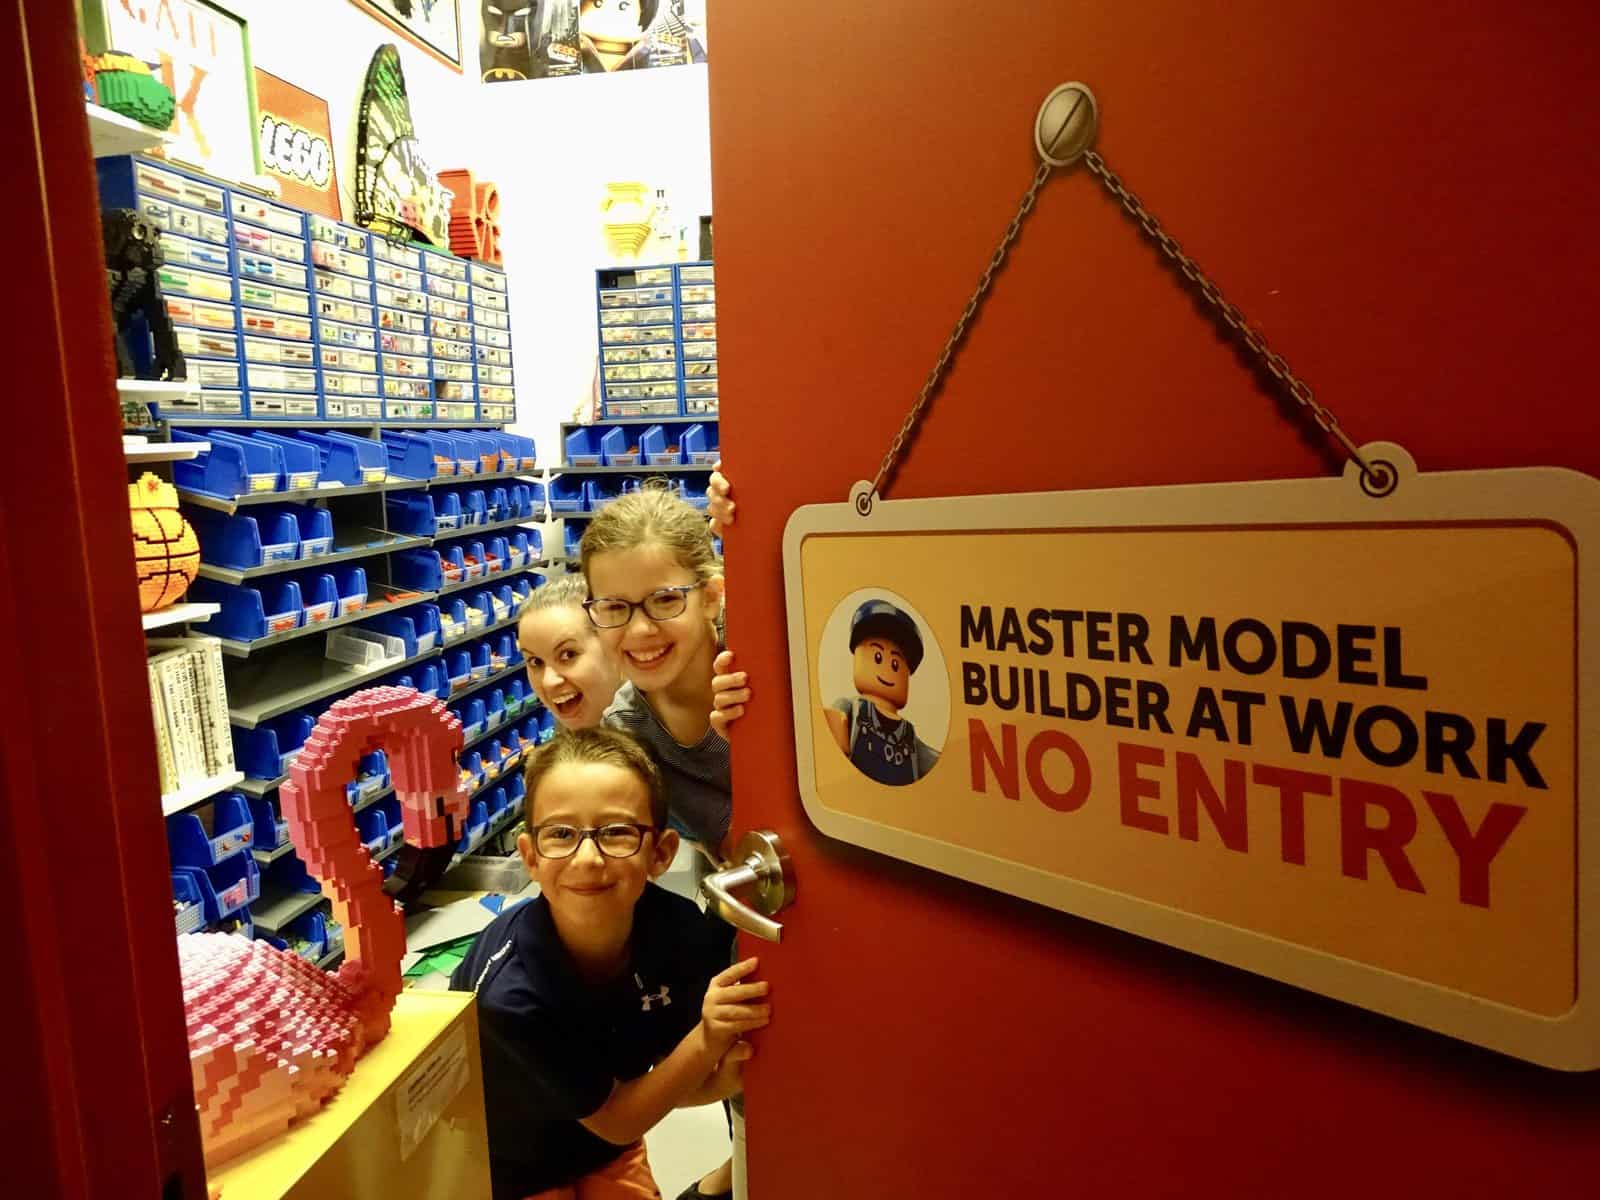 5 reasons to visit LegoLand Discovery Center this fall: